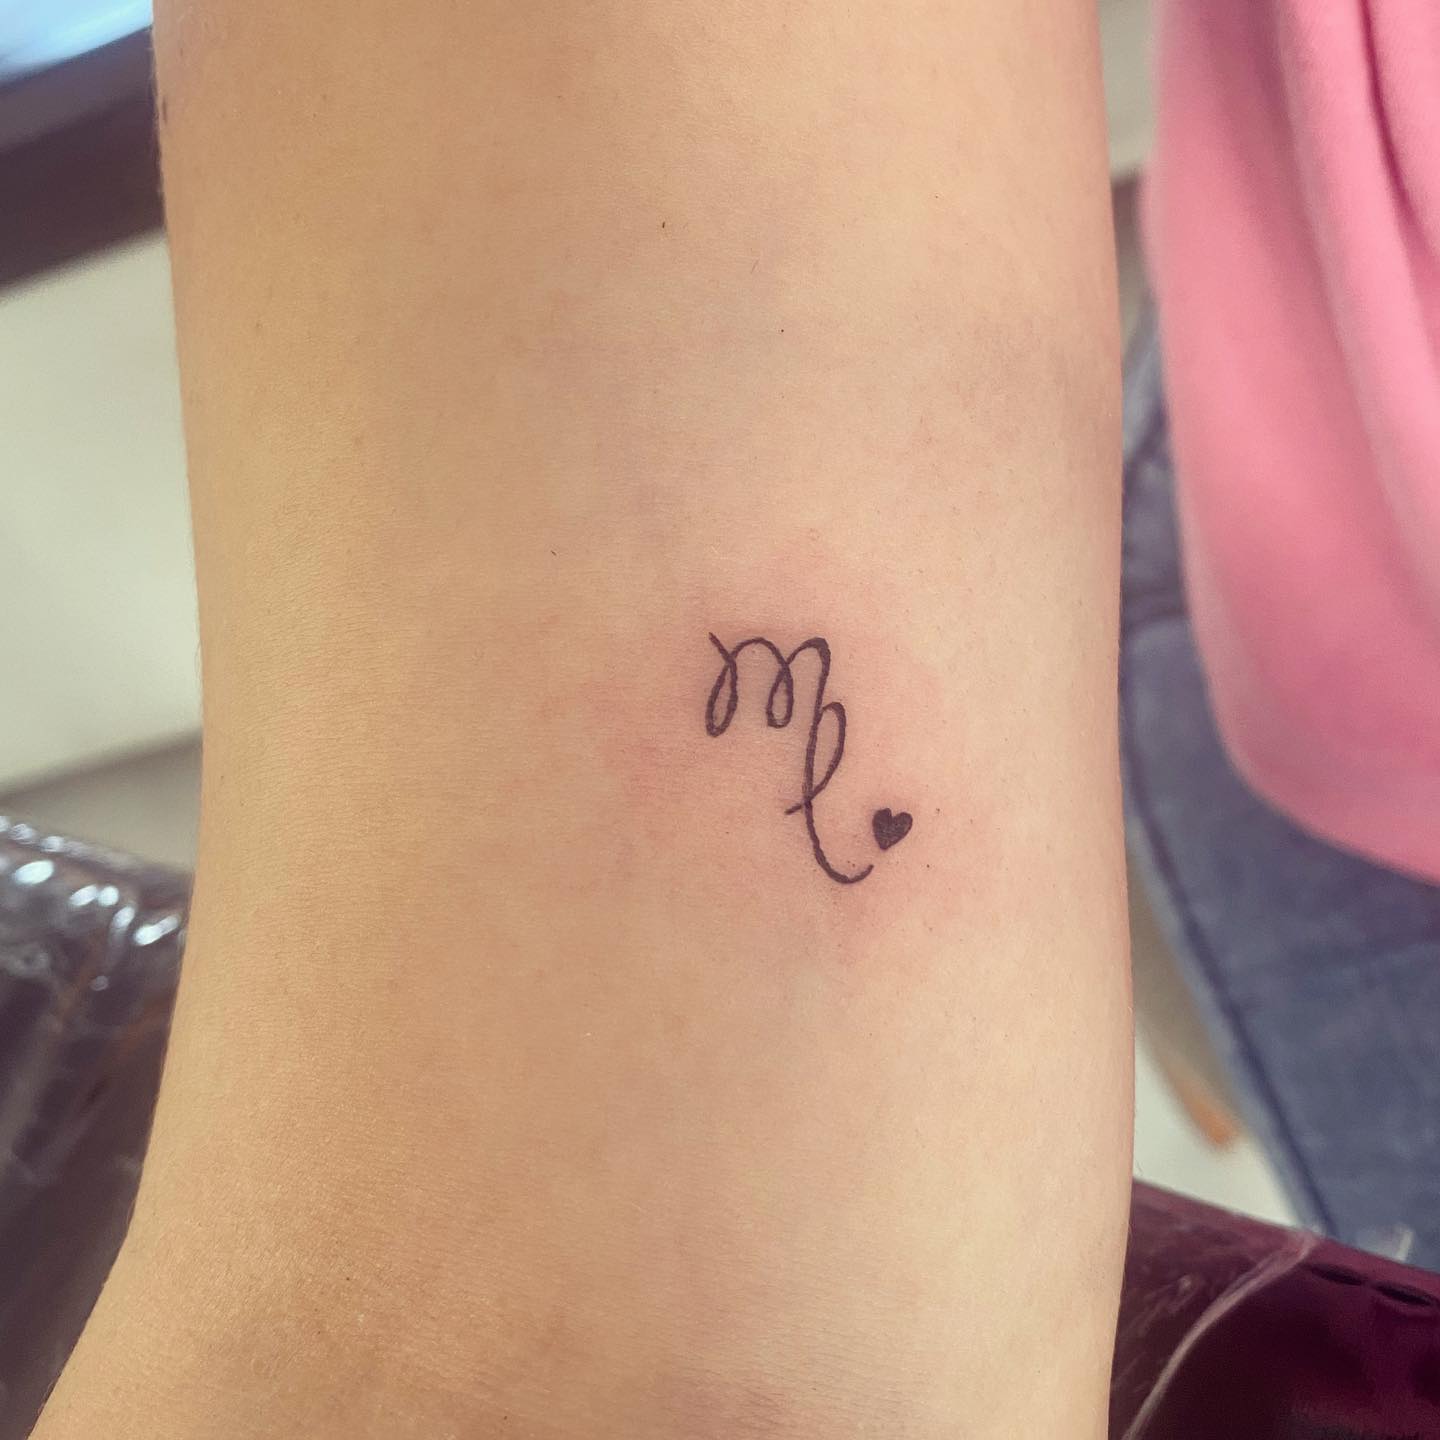 If you don't like big tattoos that cover your body, here is a perfect tattoo for you. This adorable small Virgo tattoo will suit on you.